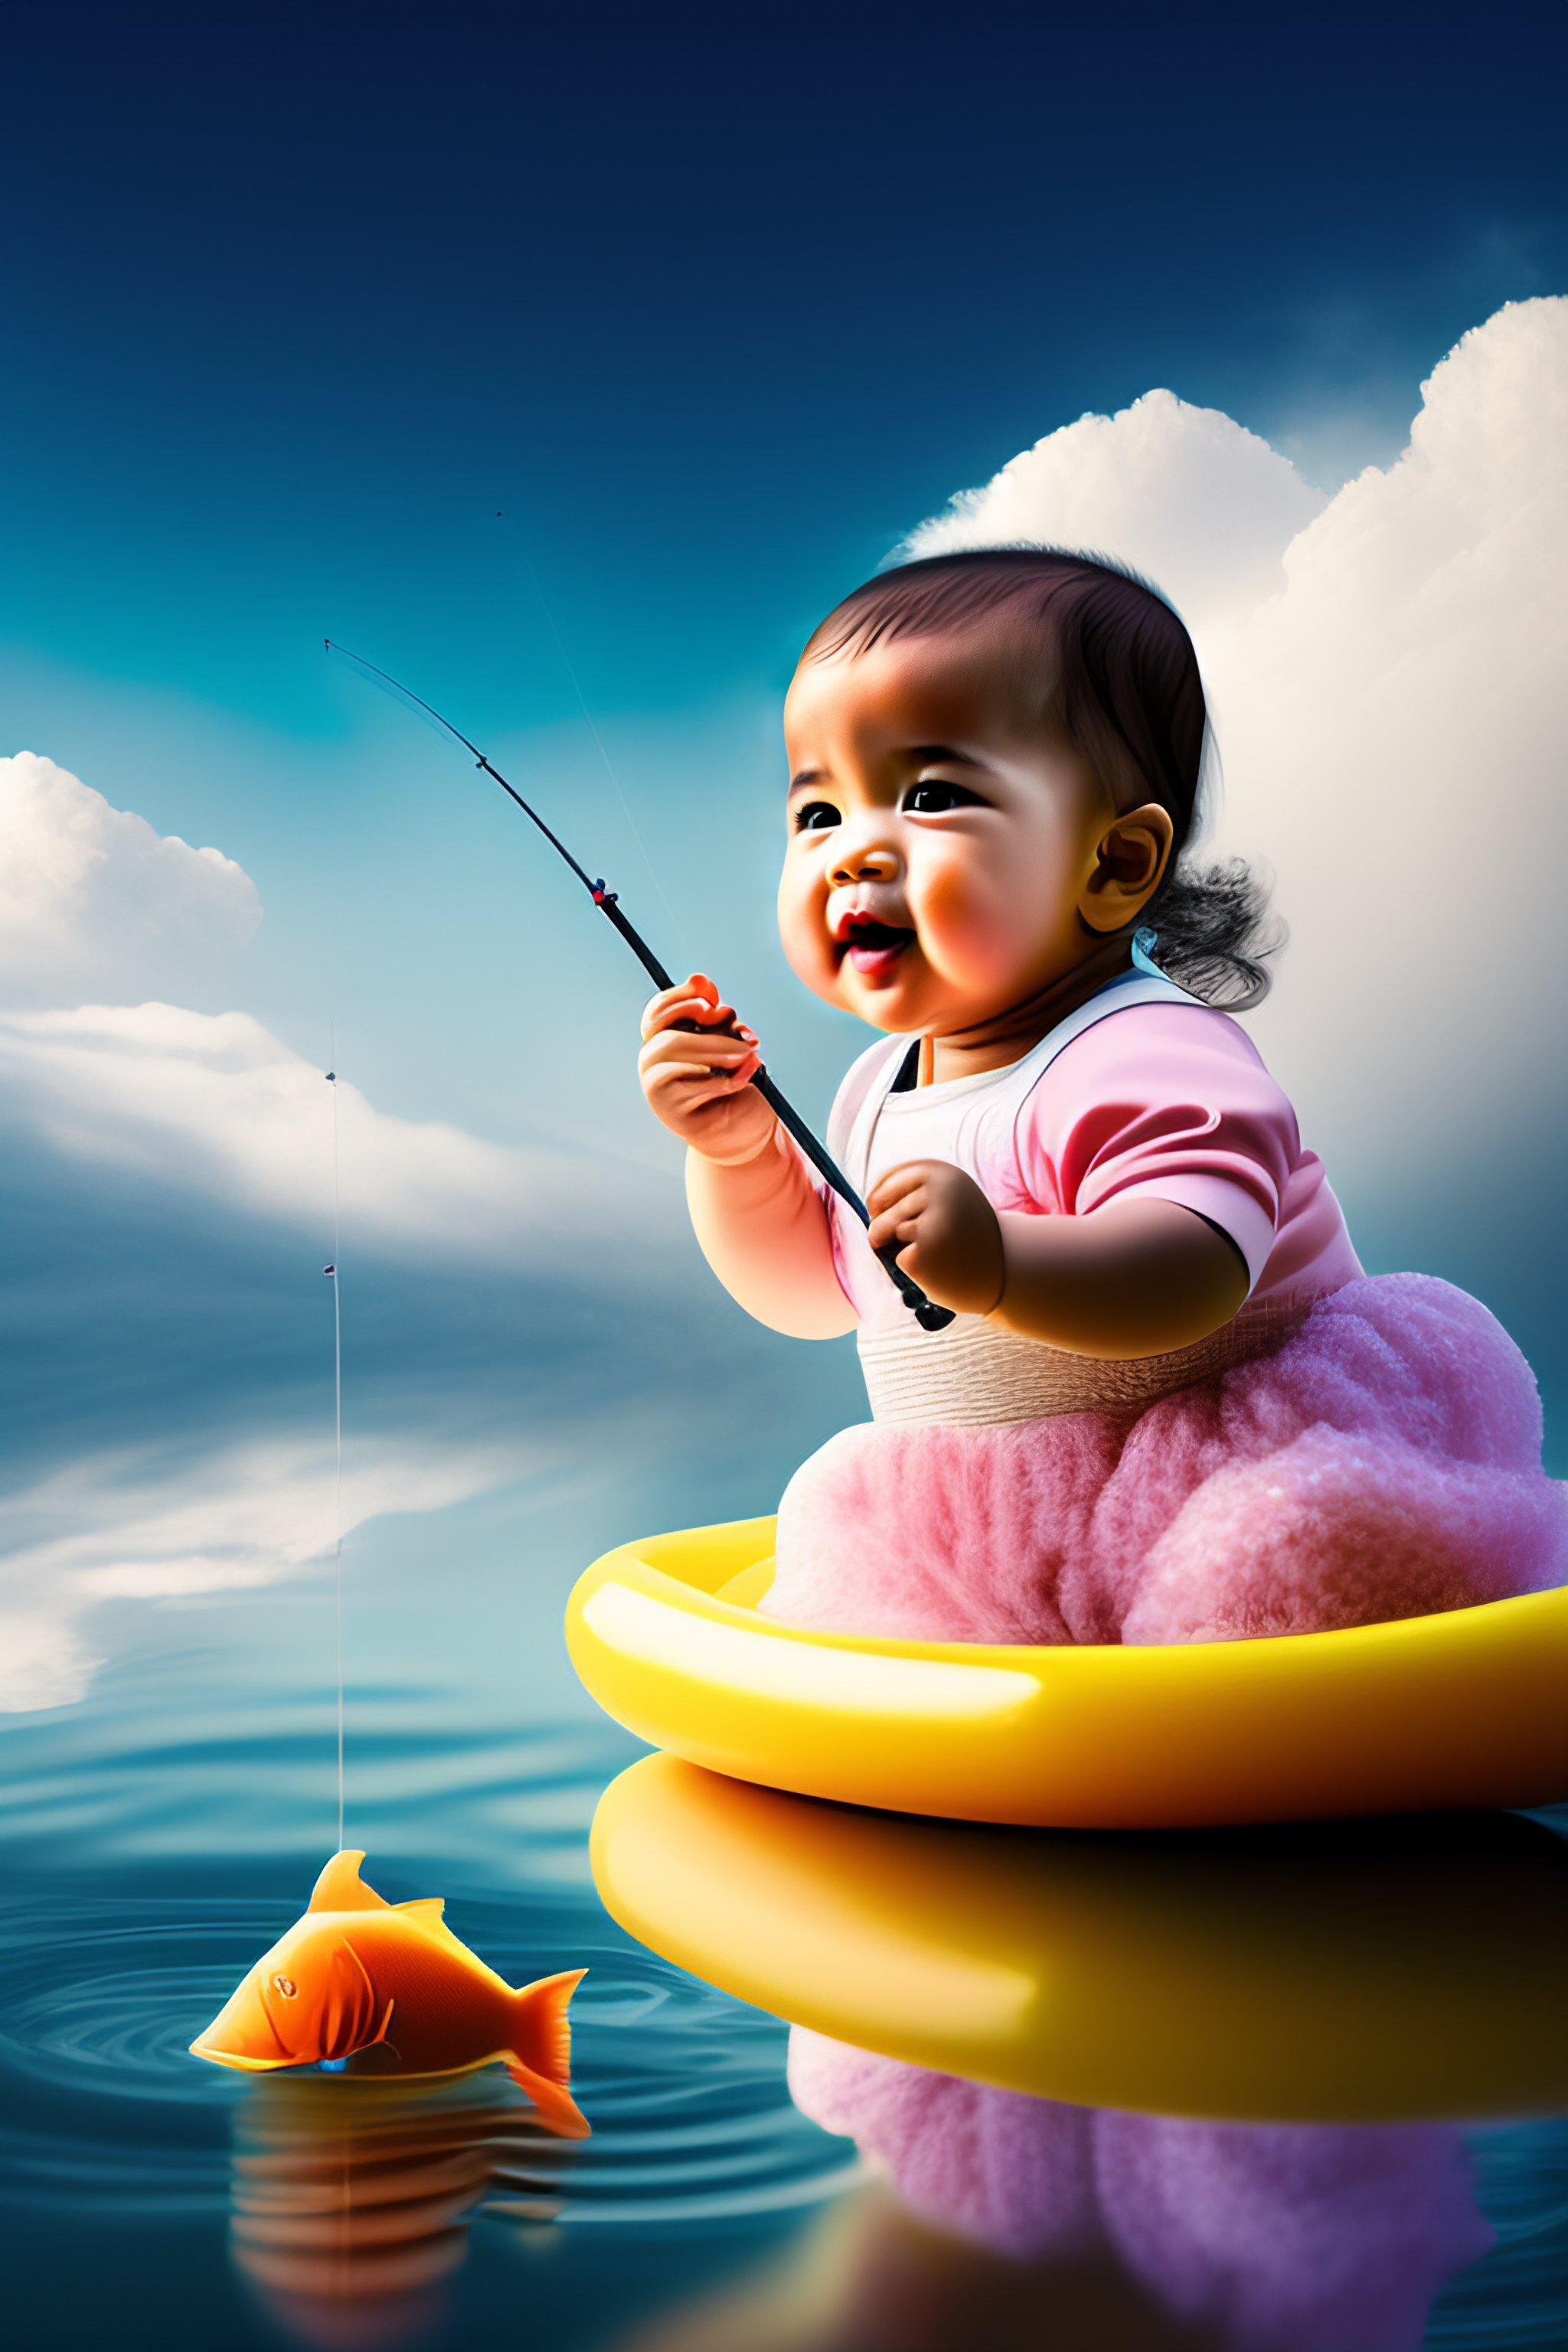 Lexica - A picture of a sweet baby girl floating on a cloud with a fishing  rod in her hand and trying to fish people